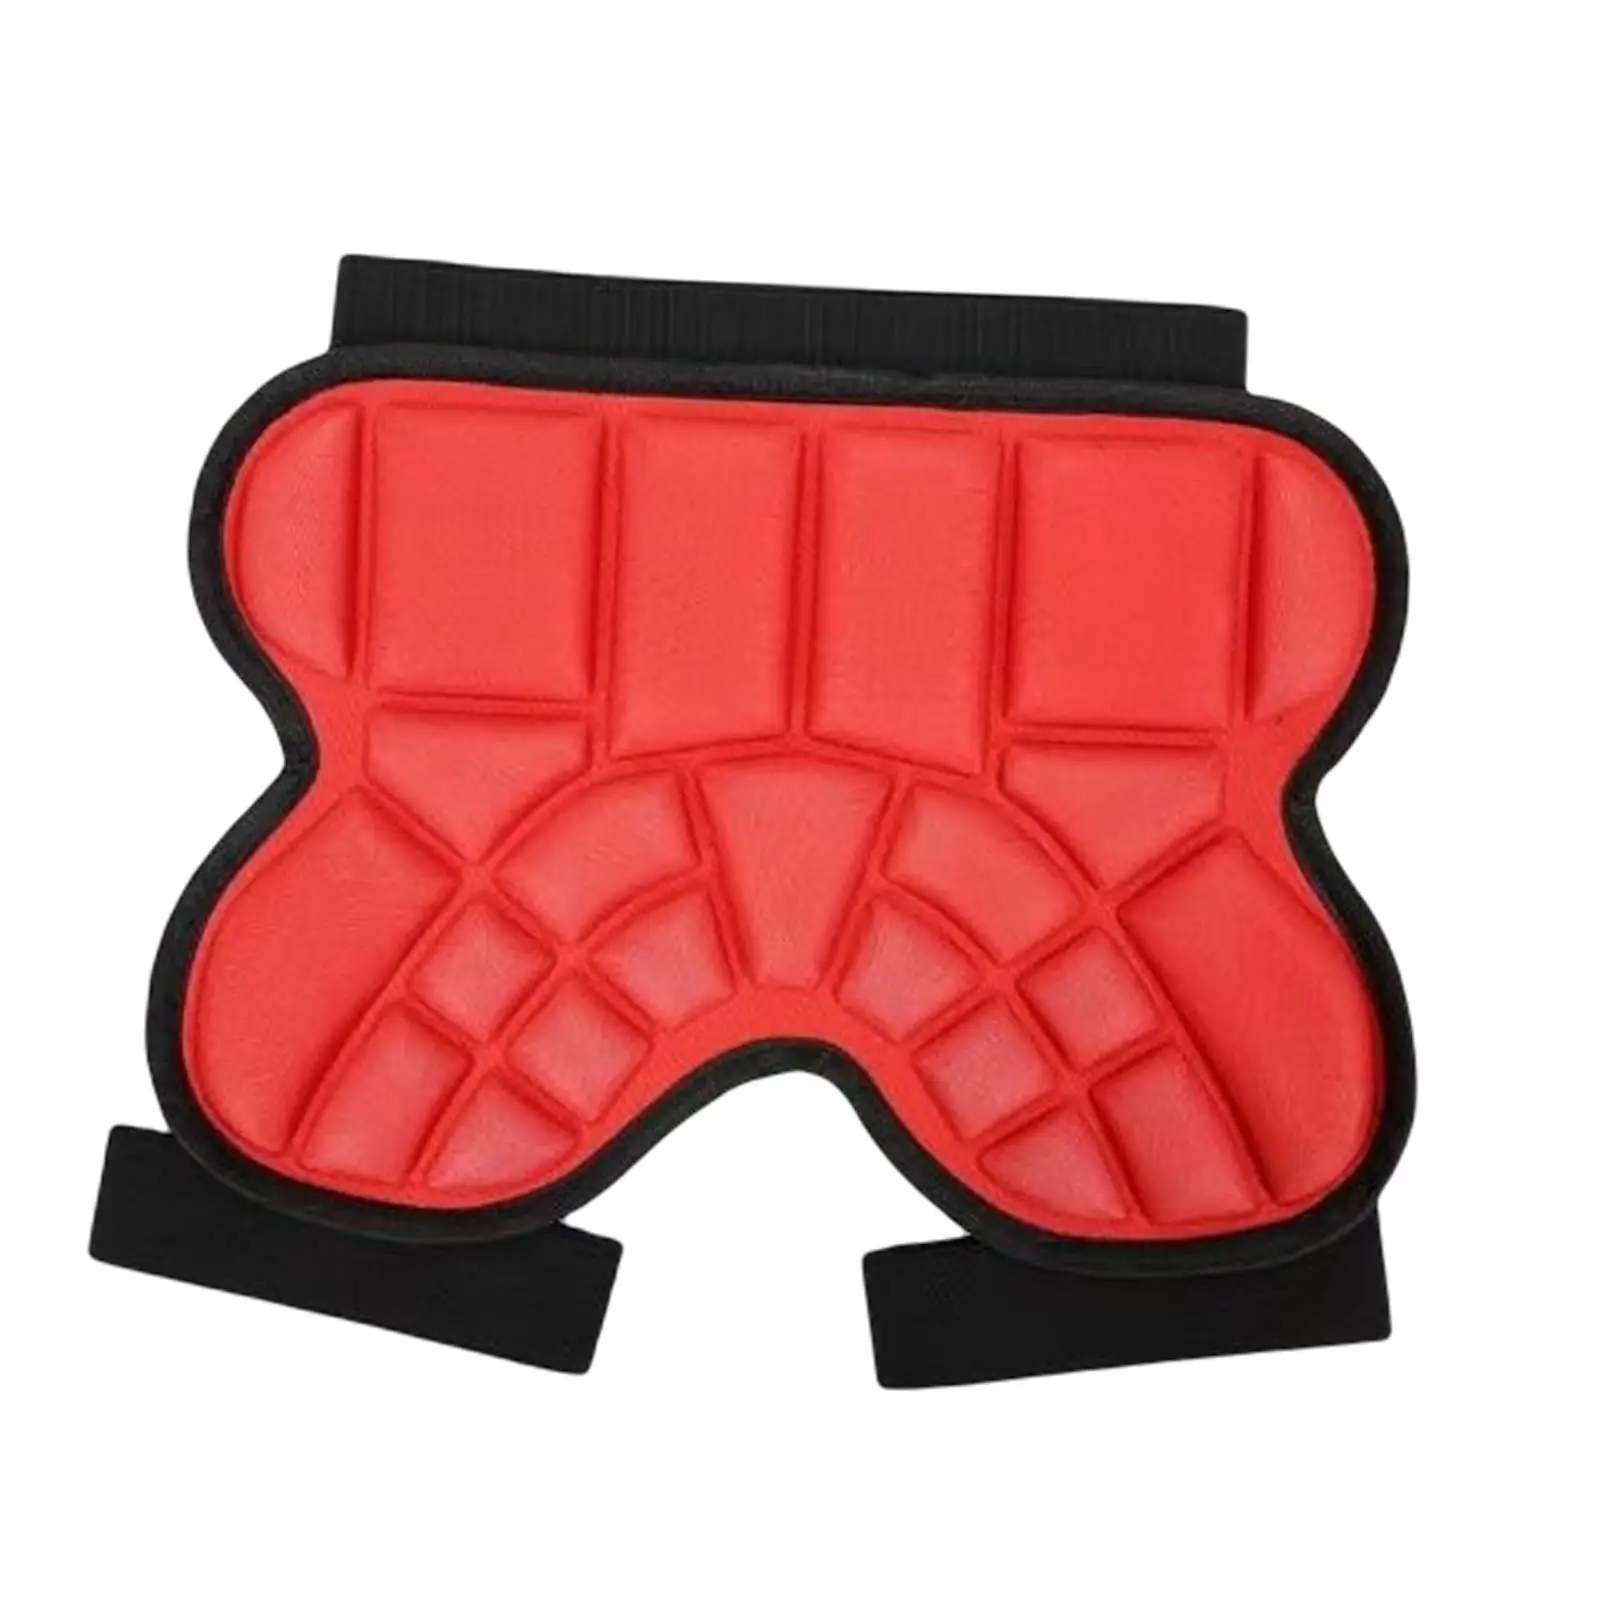 Hip Guard Pad Mat Supporter Guard Pad Padded Hip Protection for Skiing Winter Sports BMX Skateboarding Snowboarding